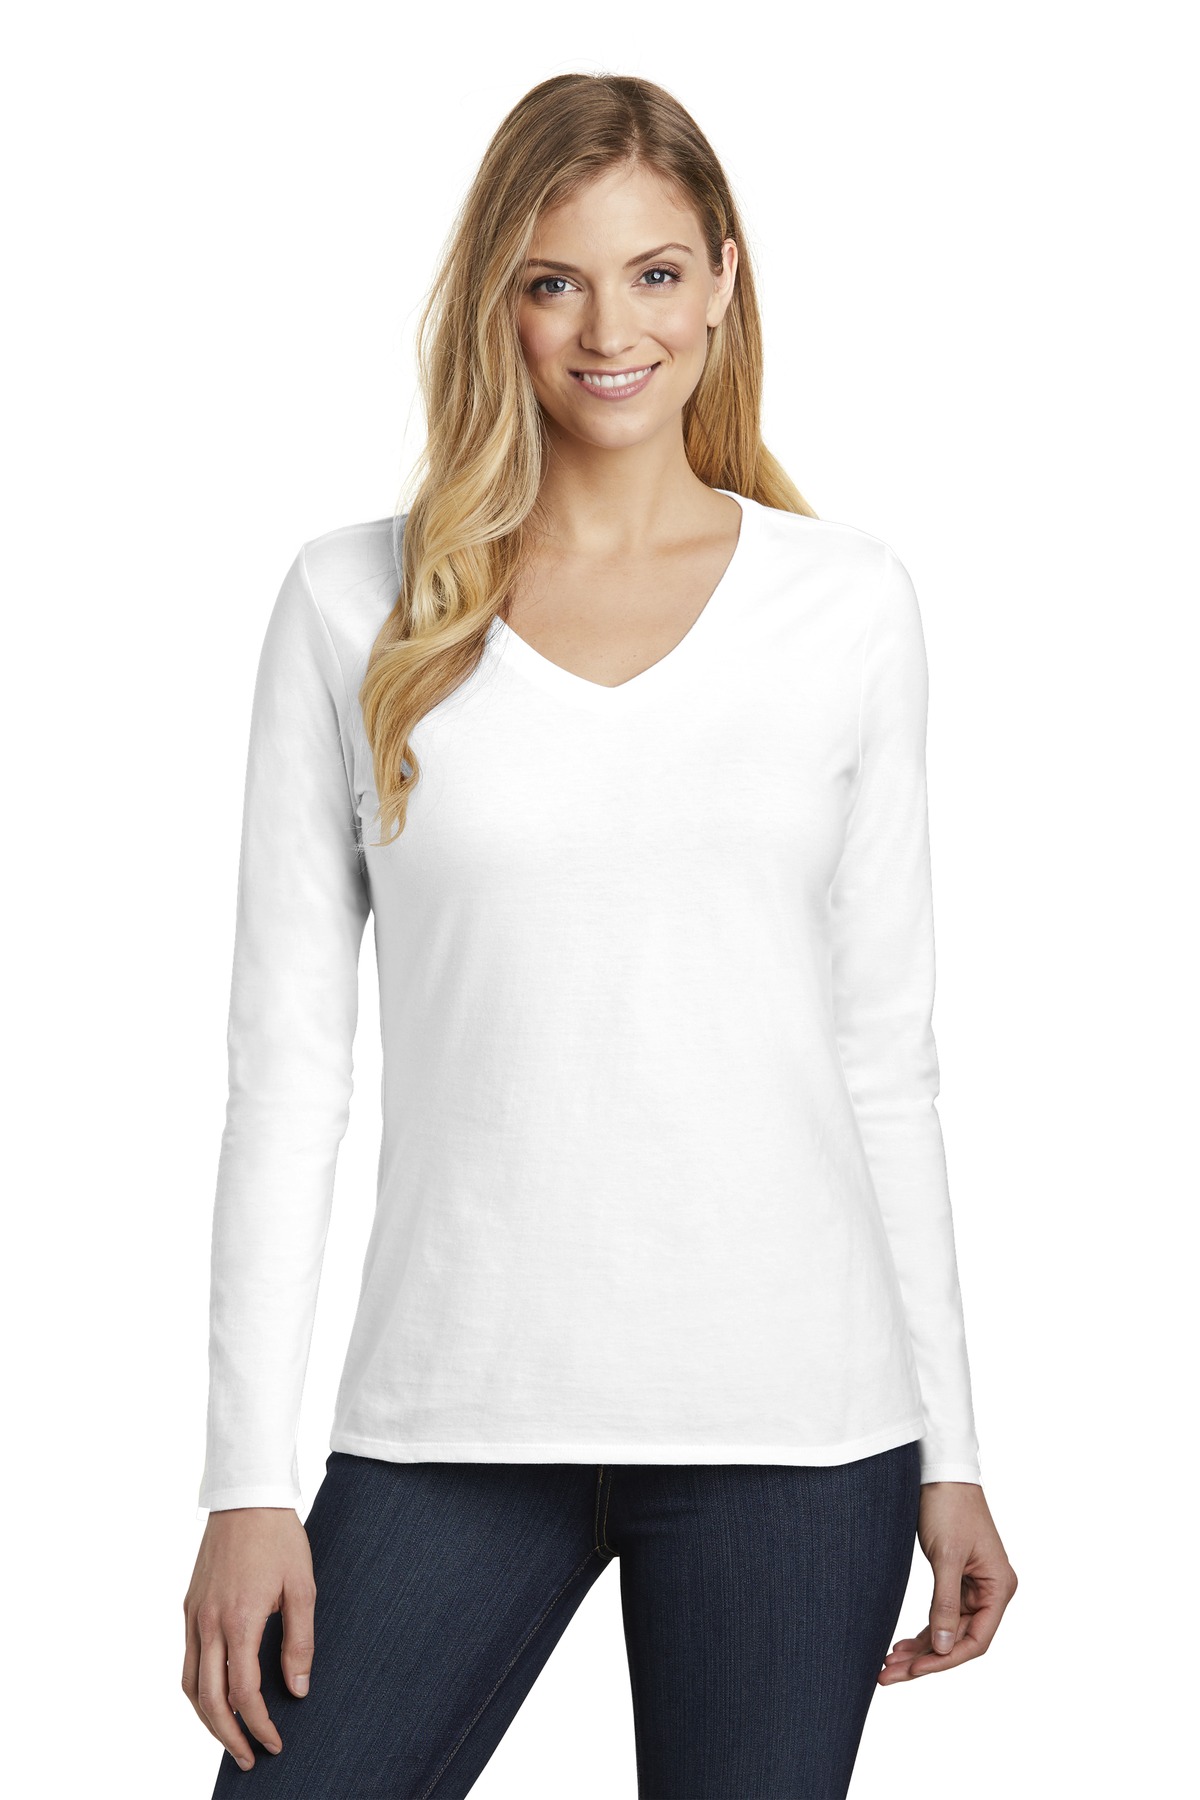 District Ladies Hospitality T-Shirts ® Womens Very Important Tee ® Long Sleeve V-Neck.-District